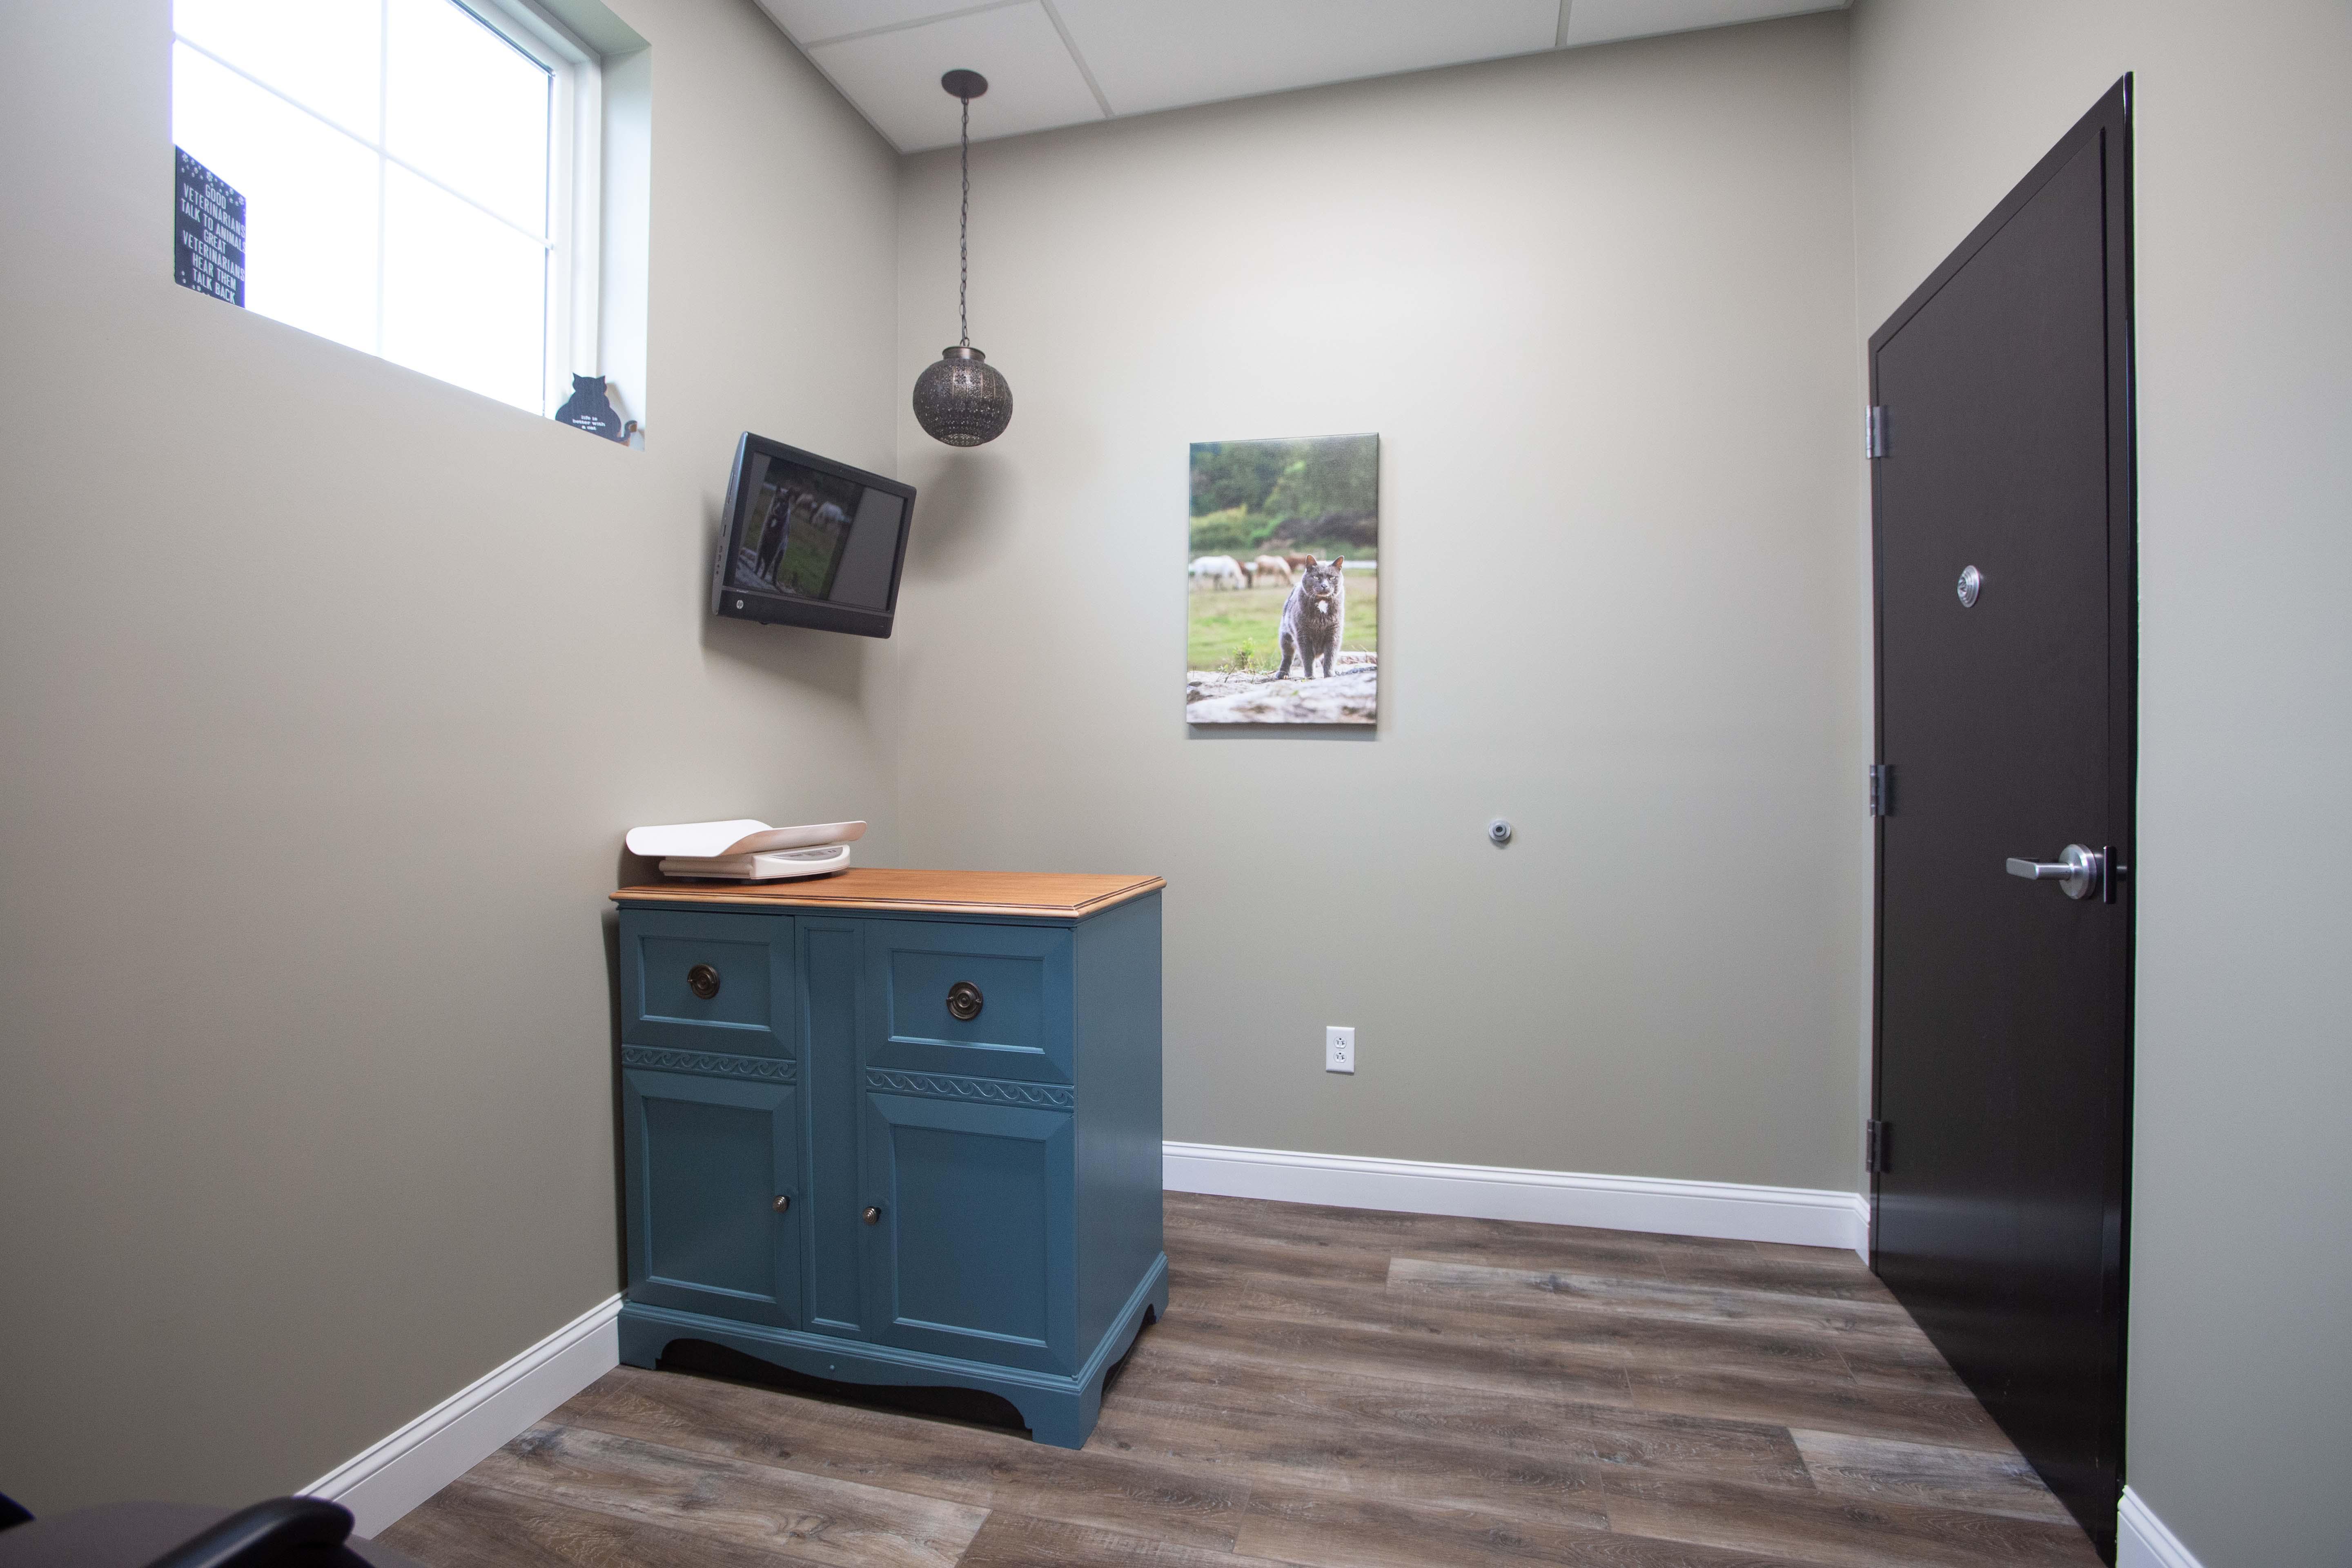 We have multiple private exam rooms where your pet will be examined by one of our experienced veterinarians.